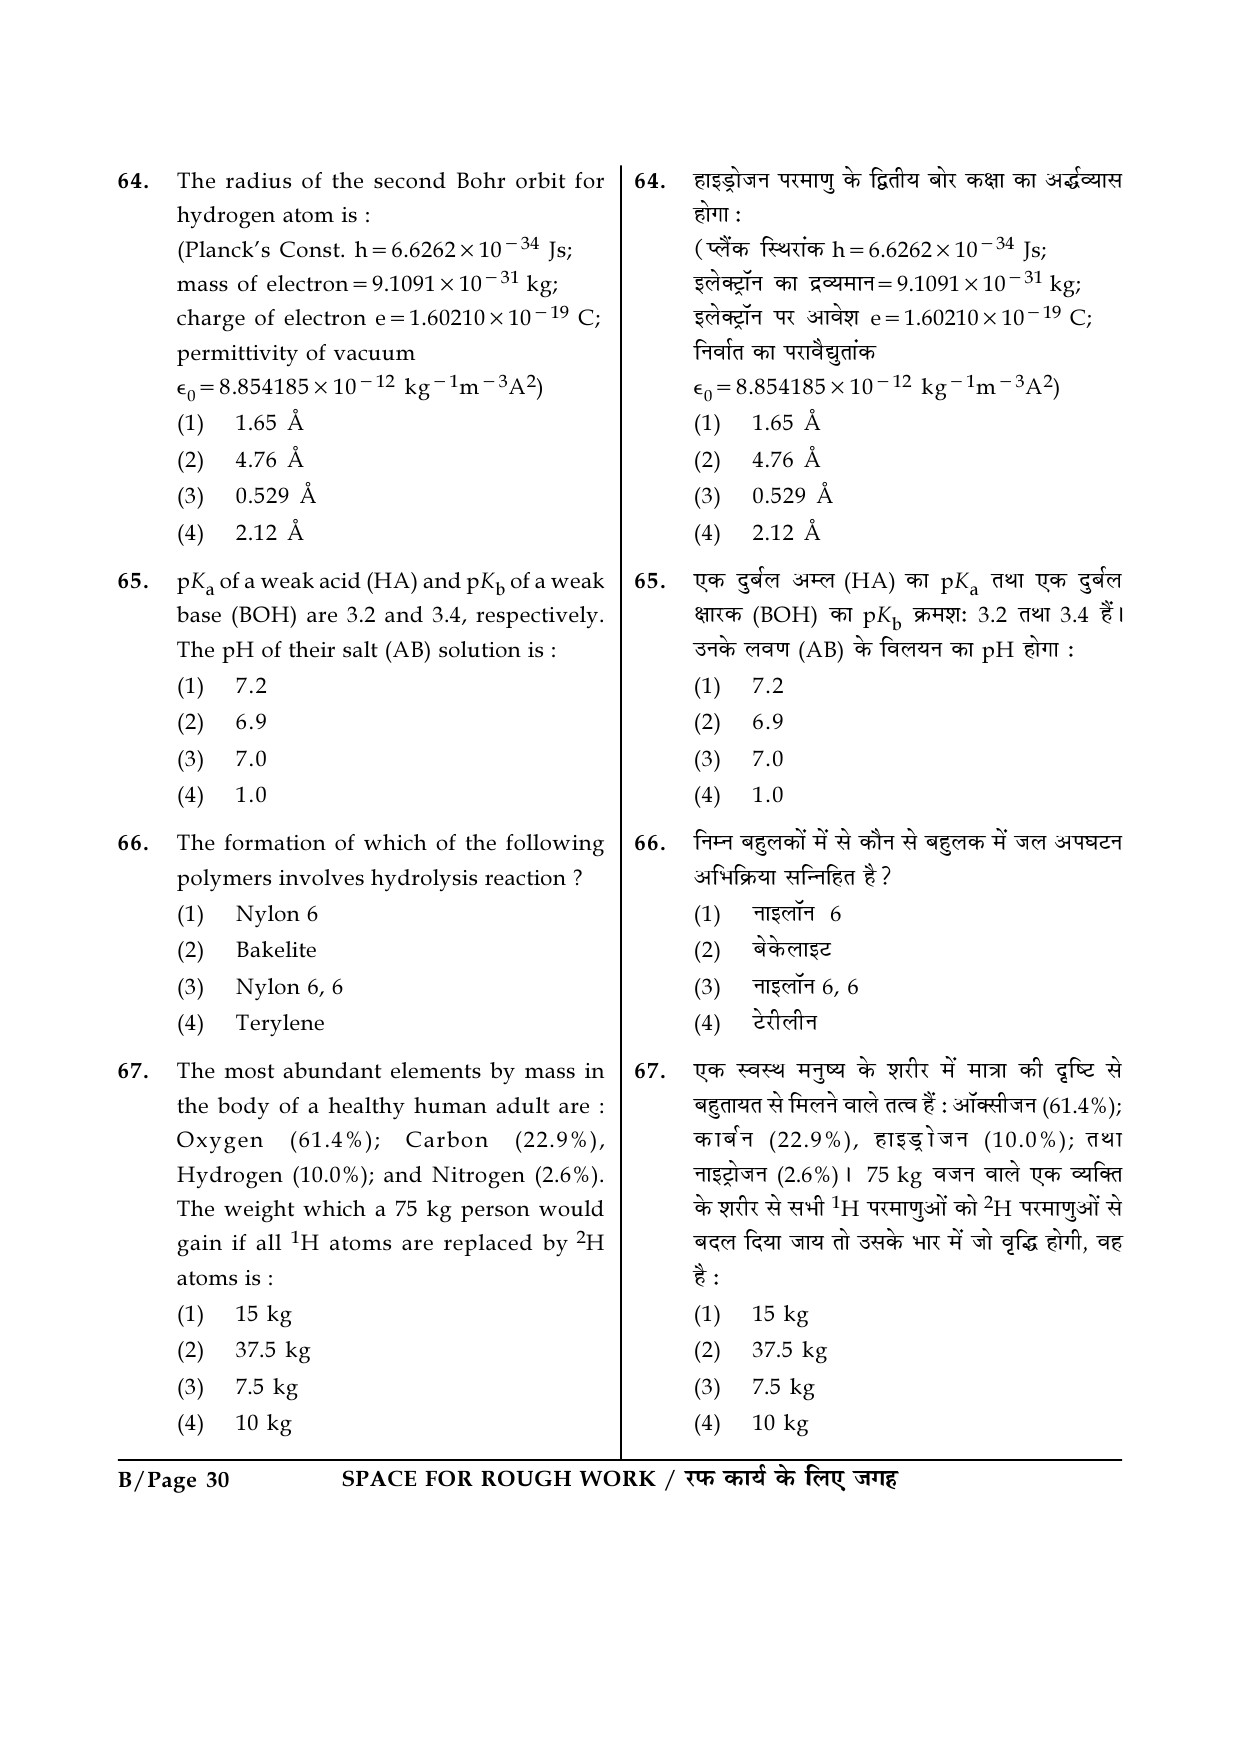 JEE Main Exam Question Paper 2017 Booklet B 30